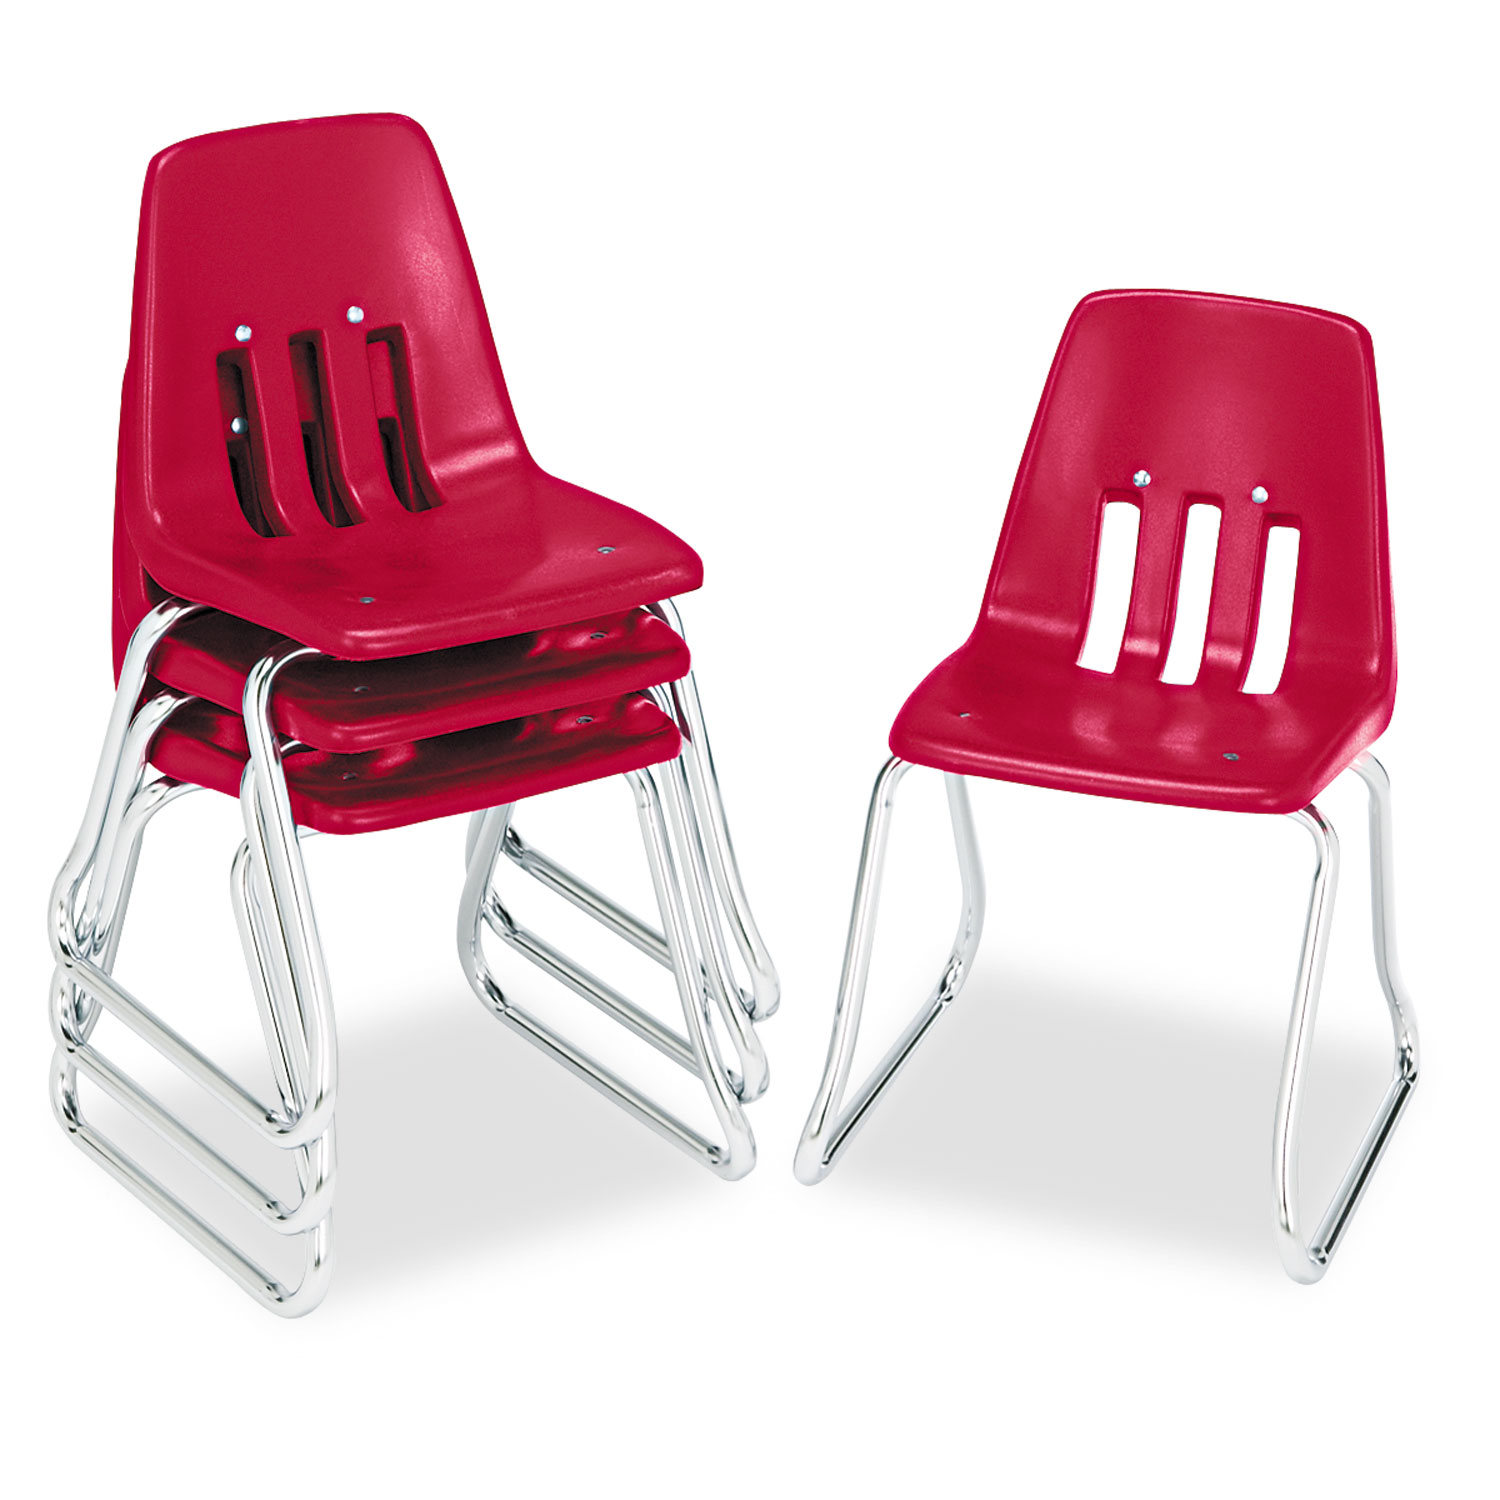 9600 Classic Series Classroom Chairs, 14 Seat Height, Red/Chrome, 4/Carton